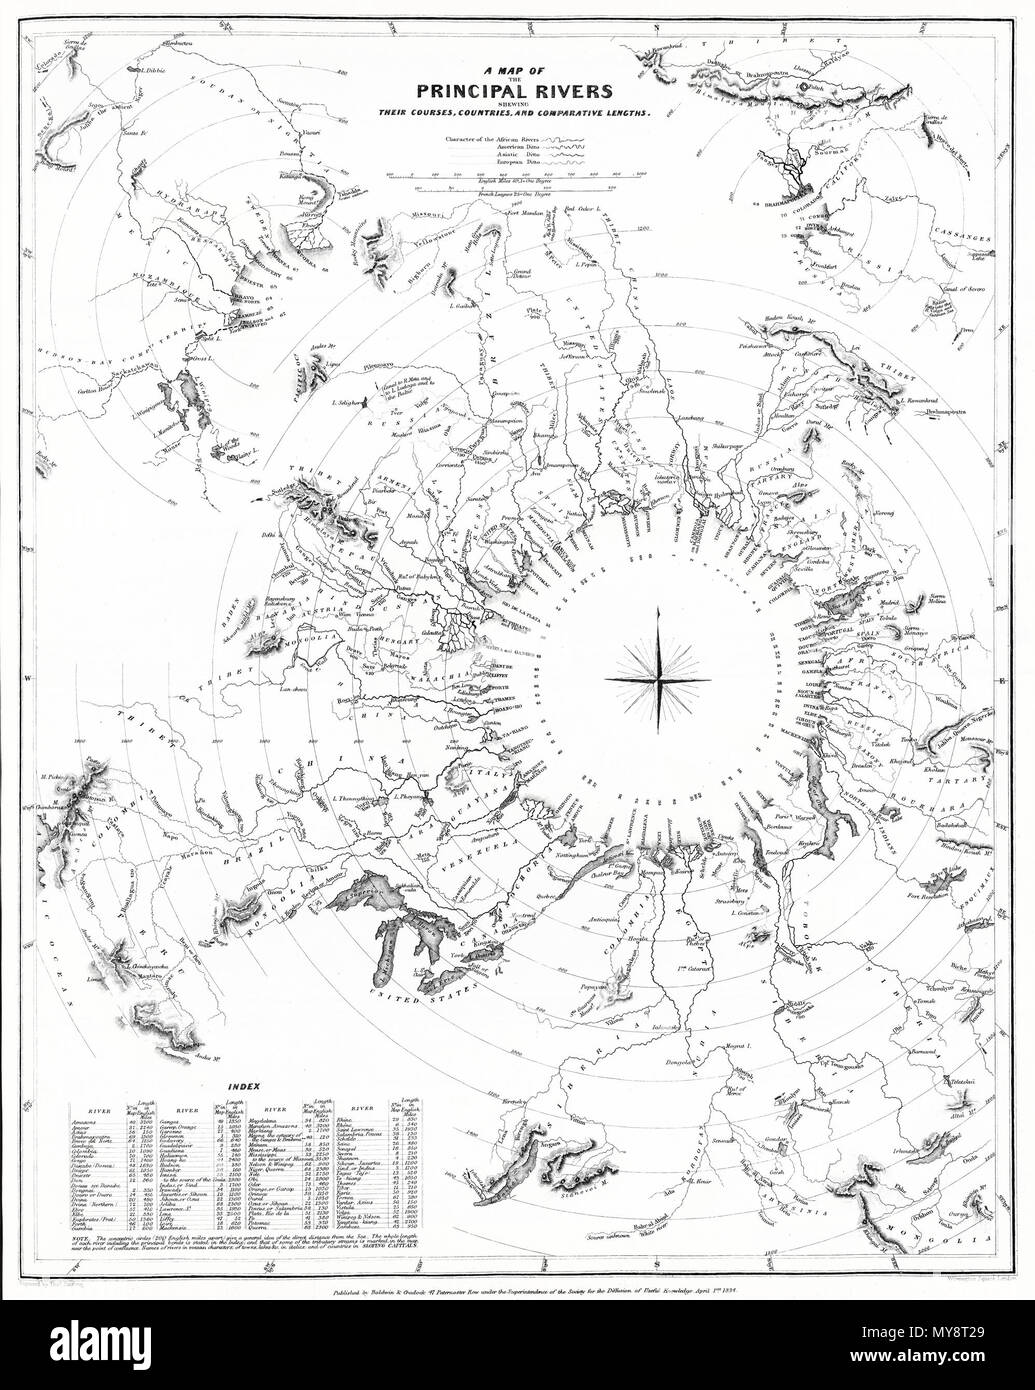 . A Map of the Principal Rivers shewing their Courses, Countries, and Comparative Lengths.  English: This curious comparative rivers chart published in 1834 by the Society for the Diffusion of Useful Knowledge is somewhat unique in that it imagines all of the great rivers of the world letting out into a circular inland sea. Concentric circles show the general lengths of the rivers as the bird files, but cannot take into account the twists and turns of the rivers themselves. What this chart does show is, to a degree, the direction and course of the rivers' flow. Direction, which in other compar Stock Photo